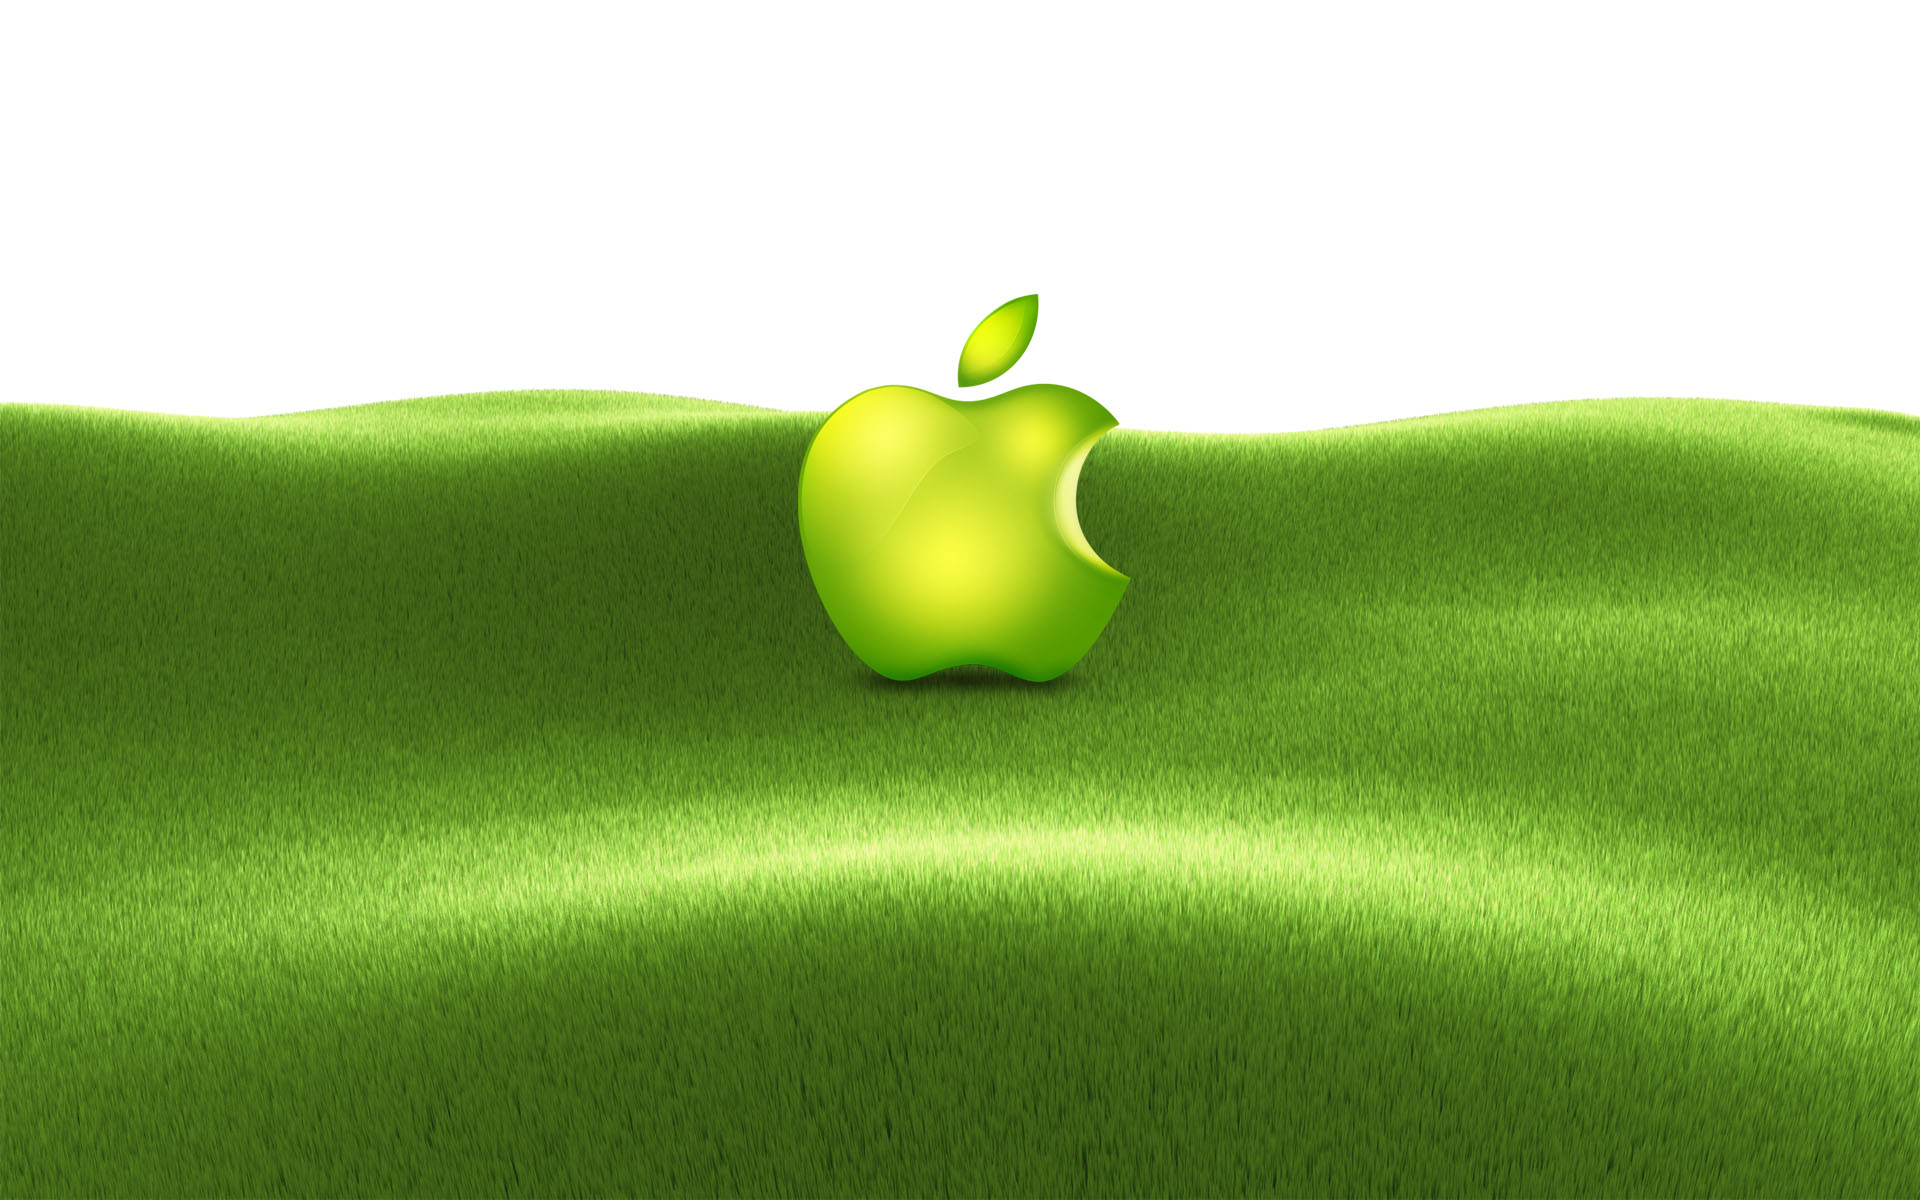 Apple company wallpapers and images   wallpapers pictures photos